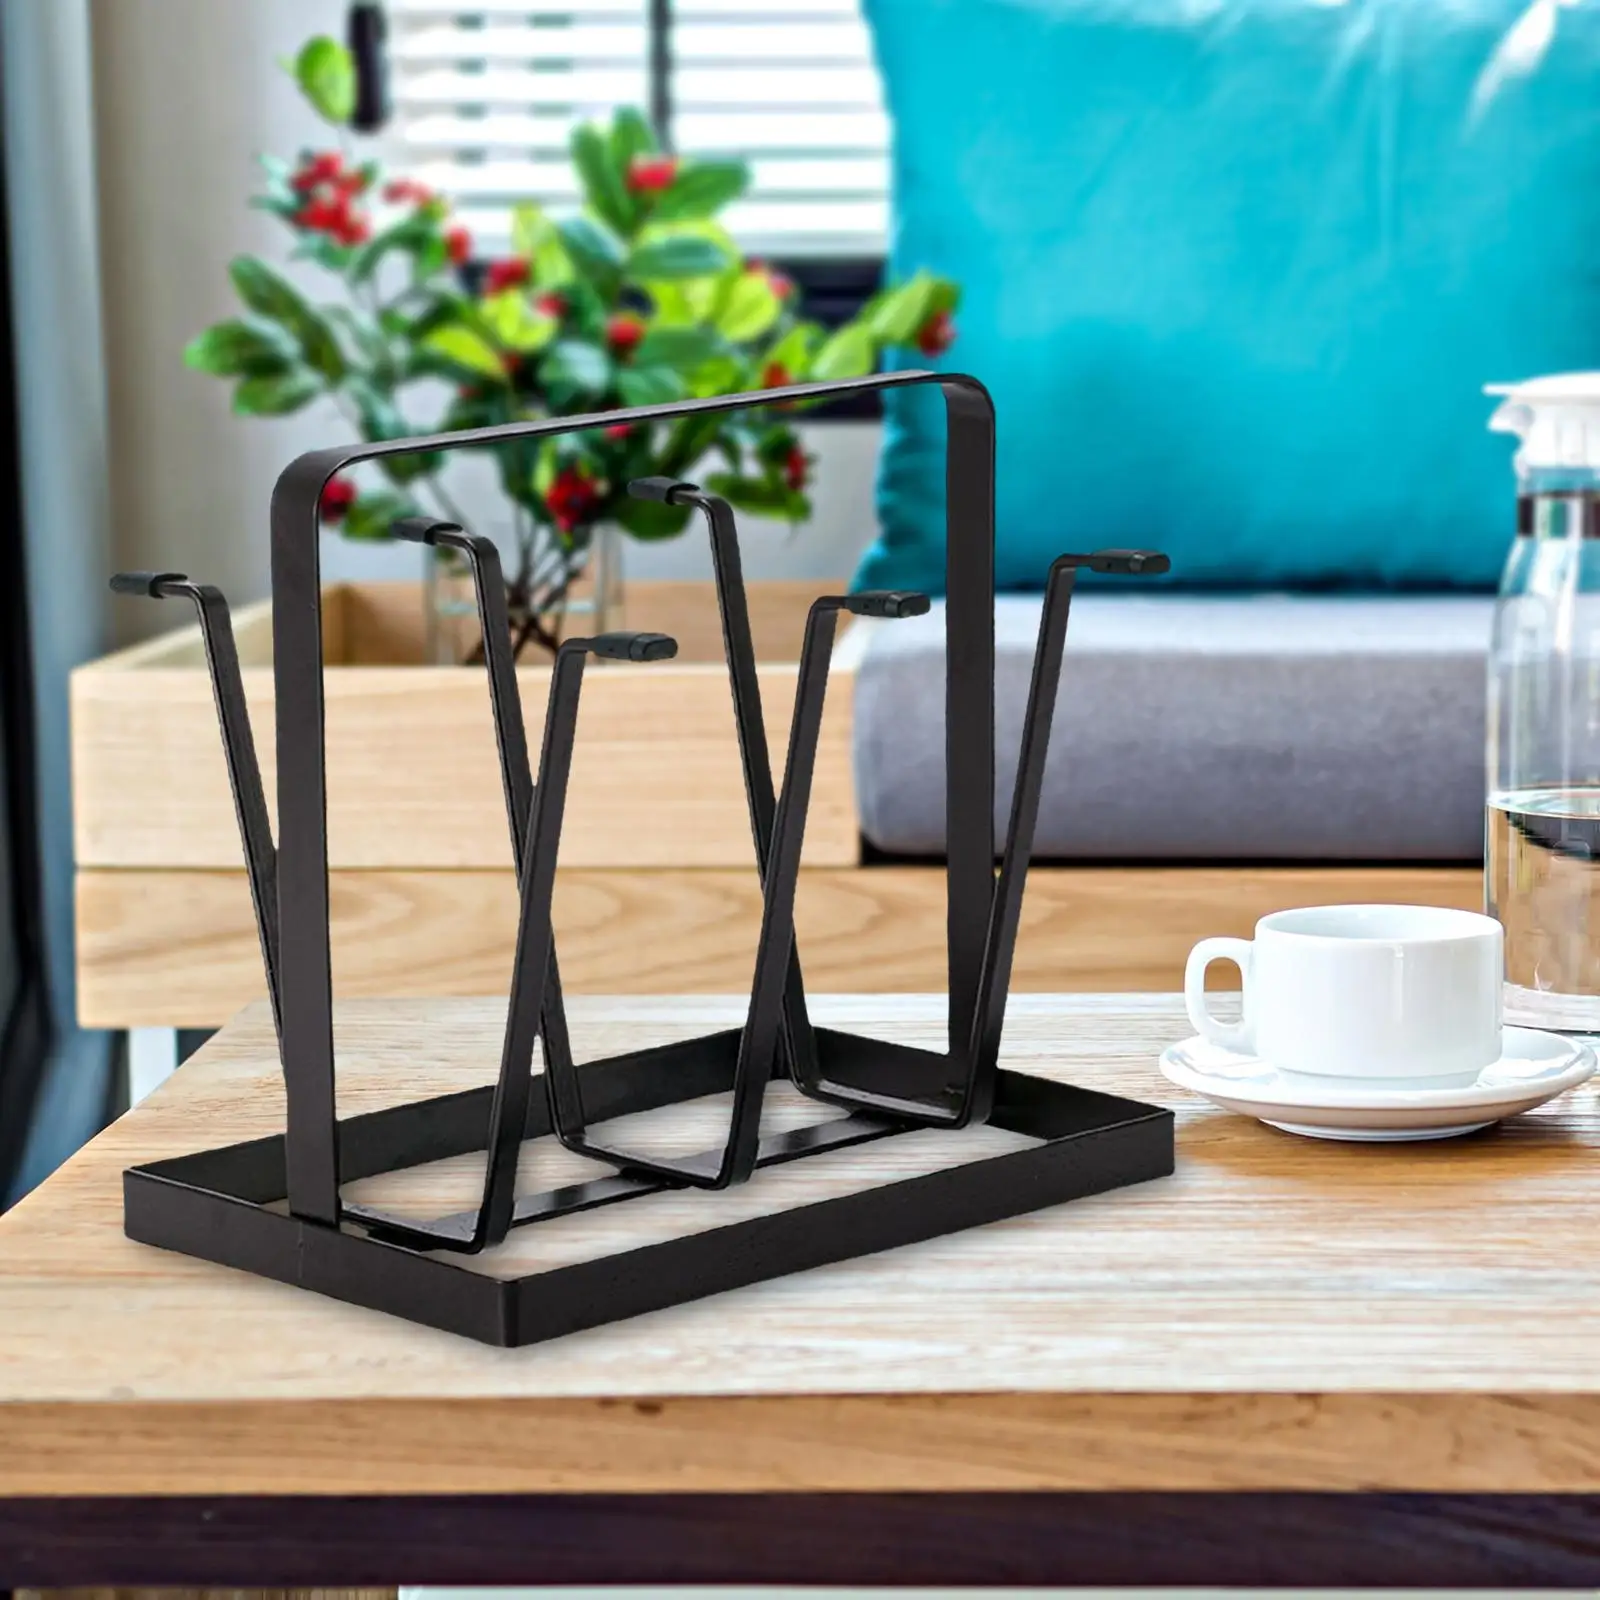 Counter Top Metal Cups Drying Rack Hanger Stand 6 Hook Organizer Sturdy